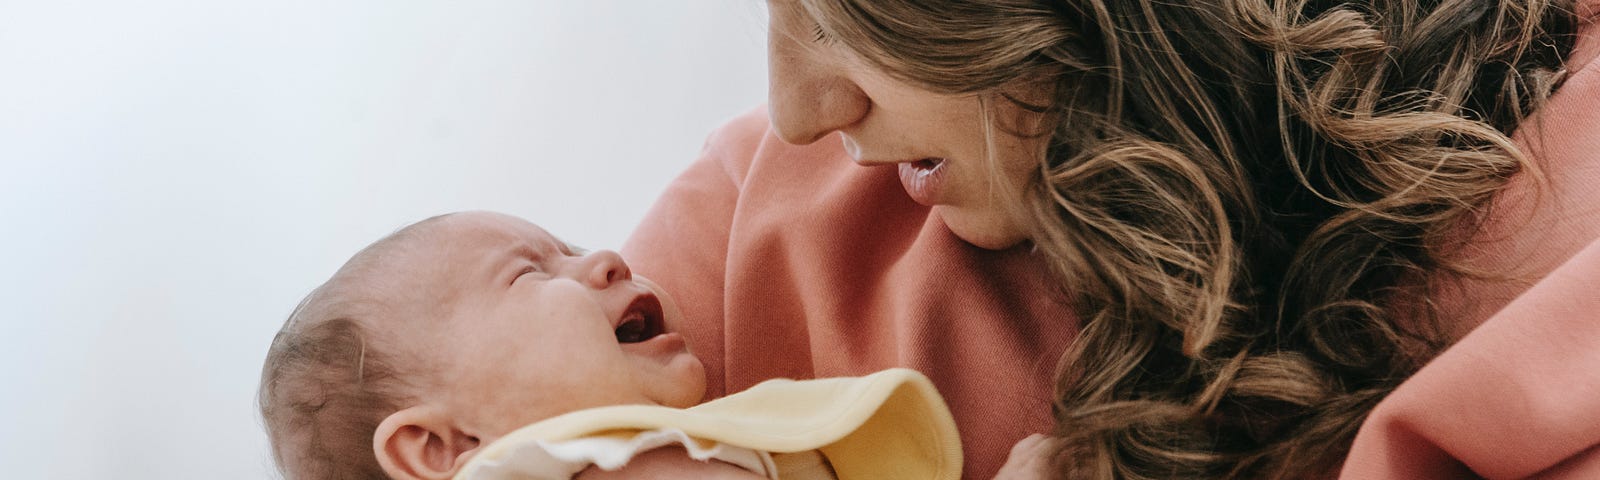 Woman wearing salmon-coloured sweater looking down at crying infant in her arms.